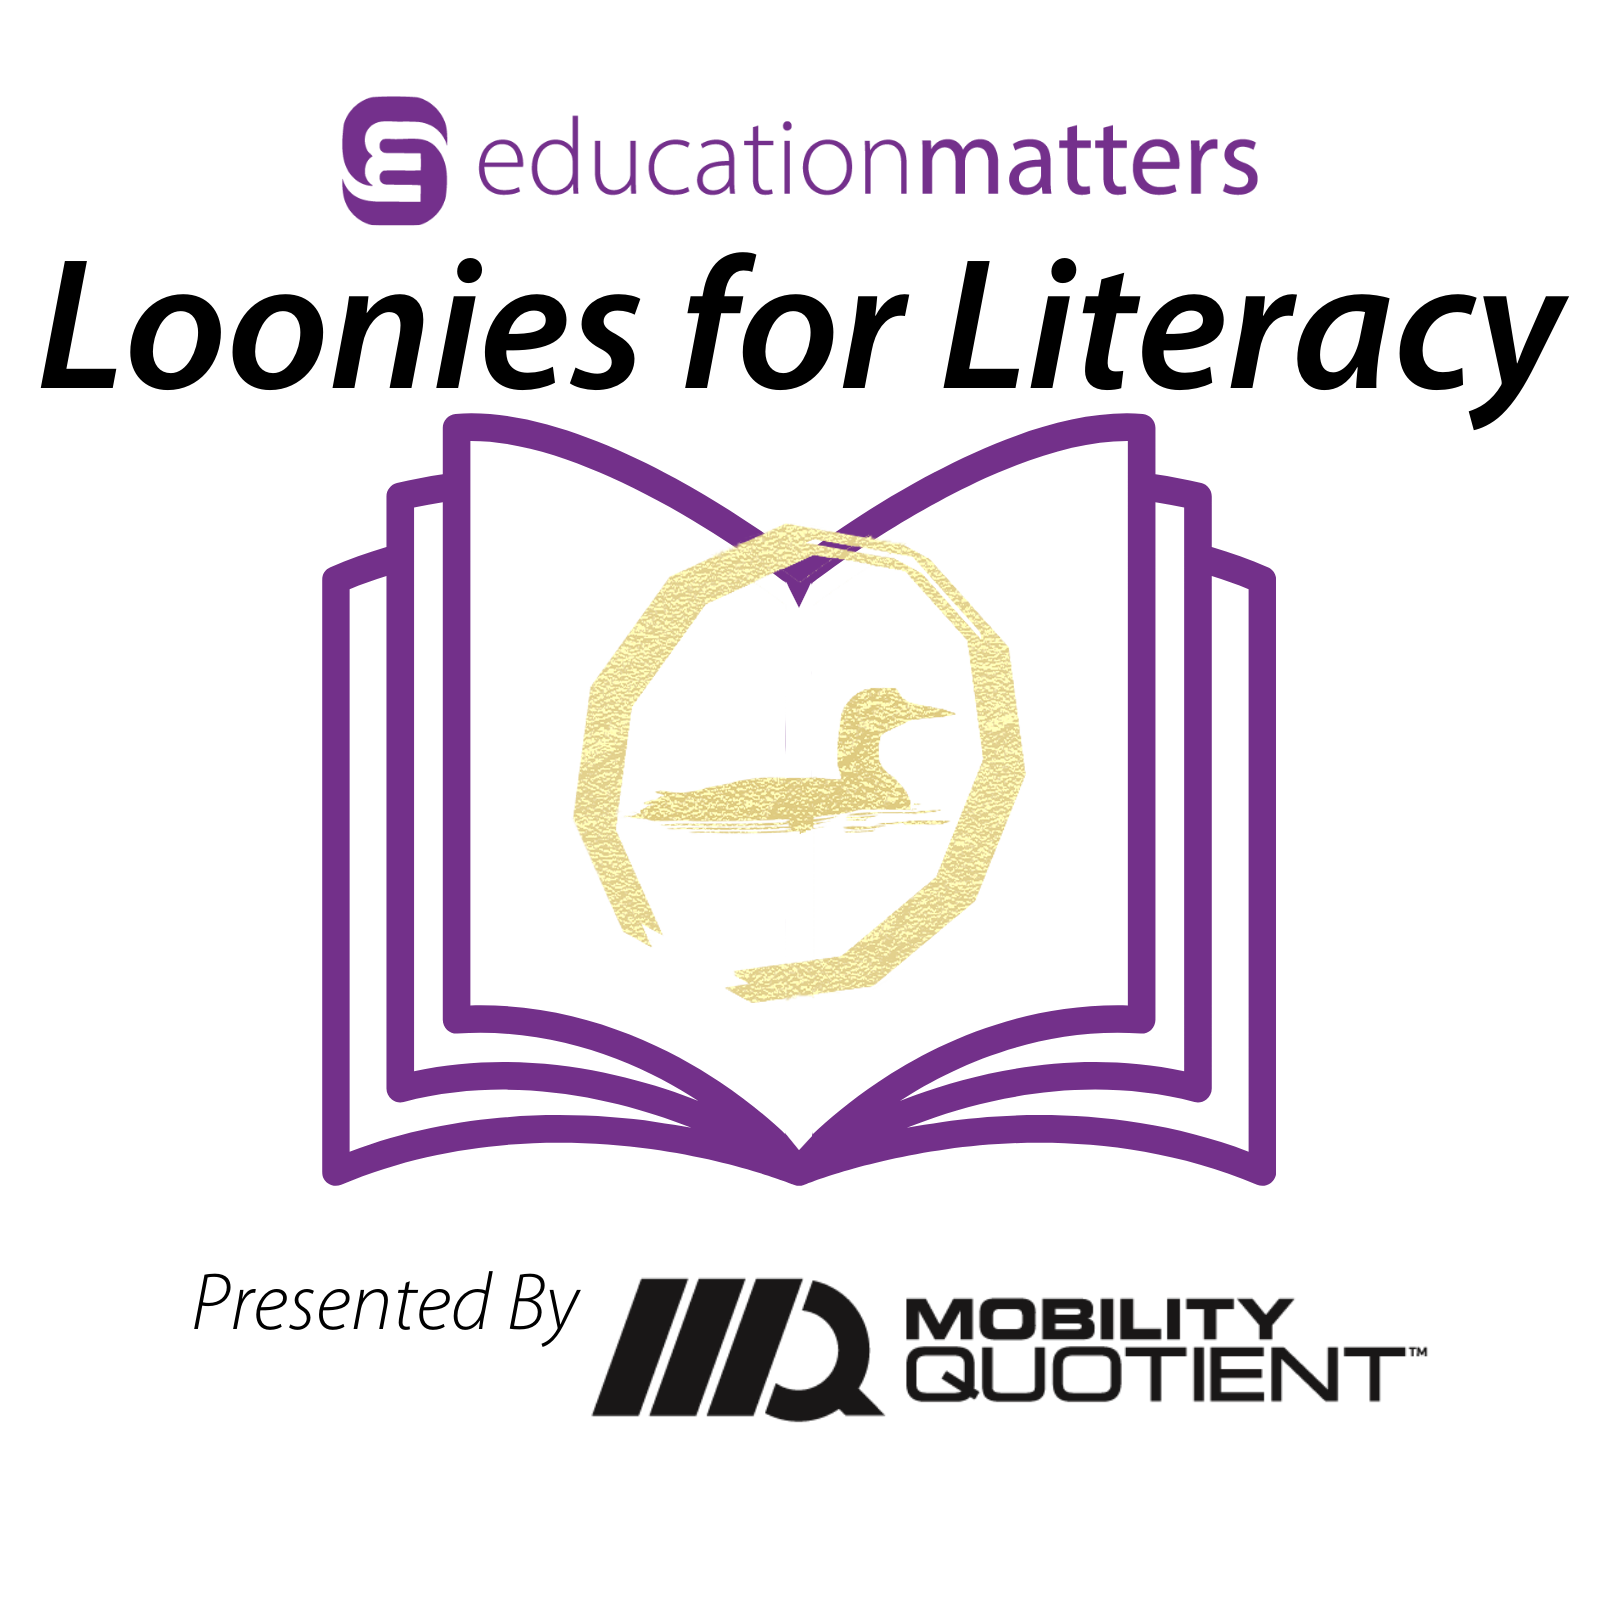 Loonies for Literacy - EducationMatters